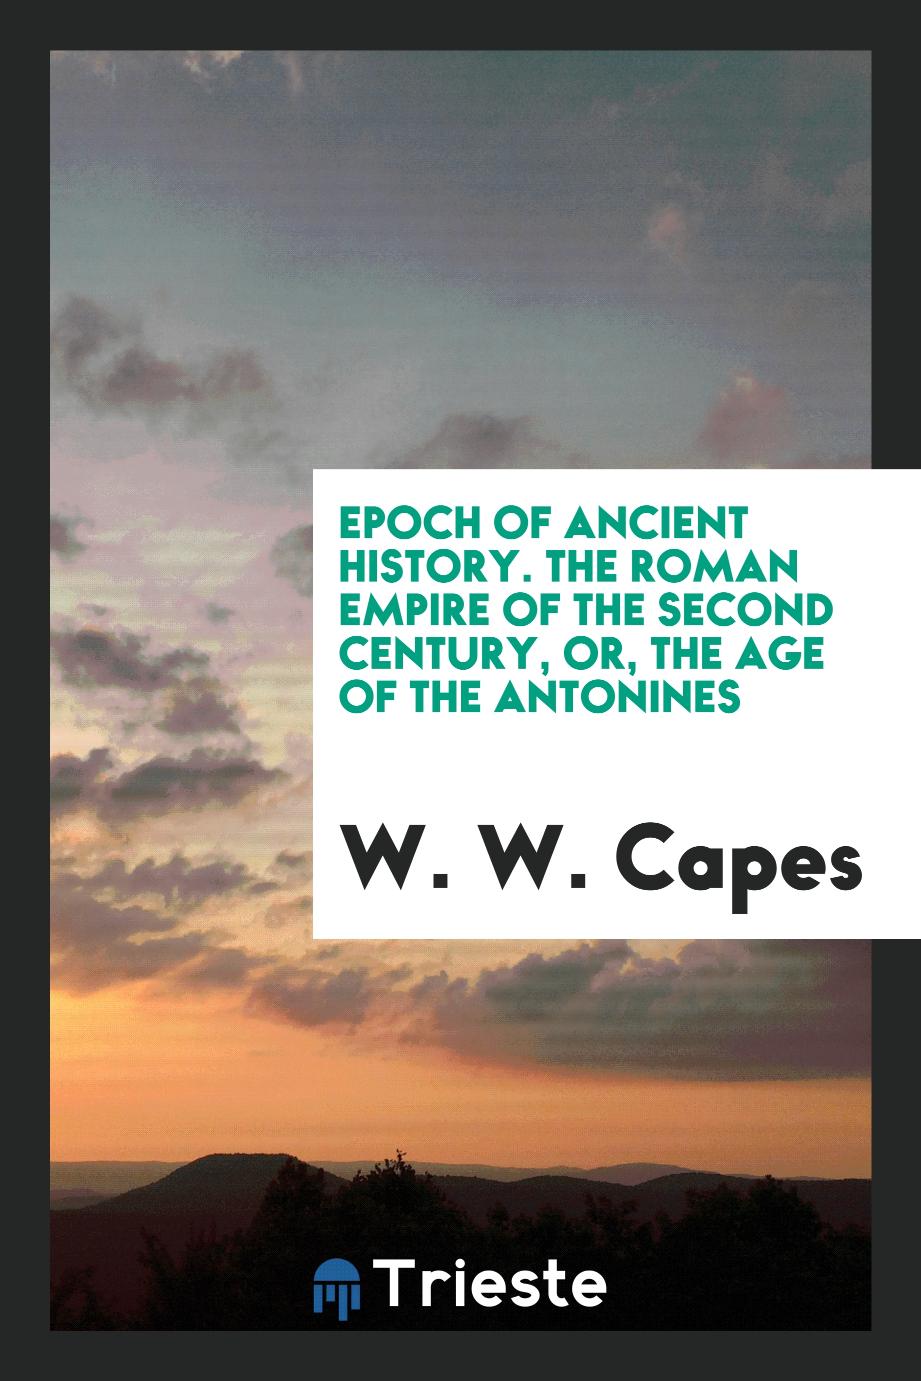 Epoch of Ancient History. The Roman Empire of the Second Century, or, the Age of the Antonines